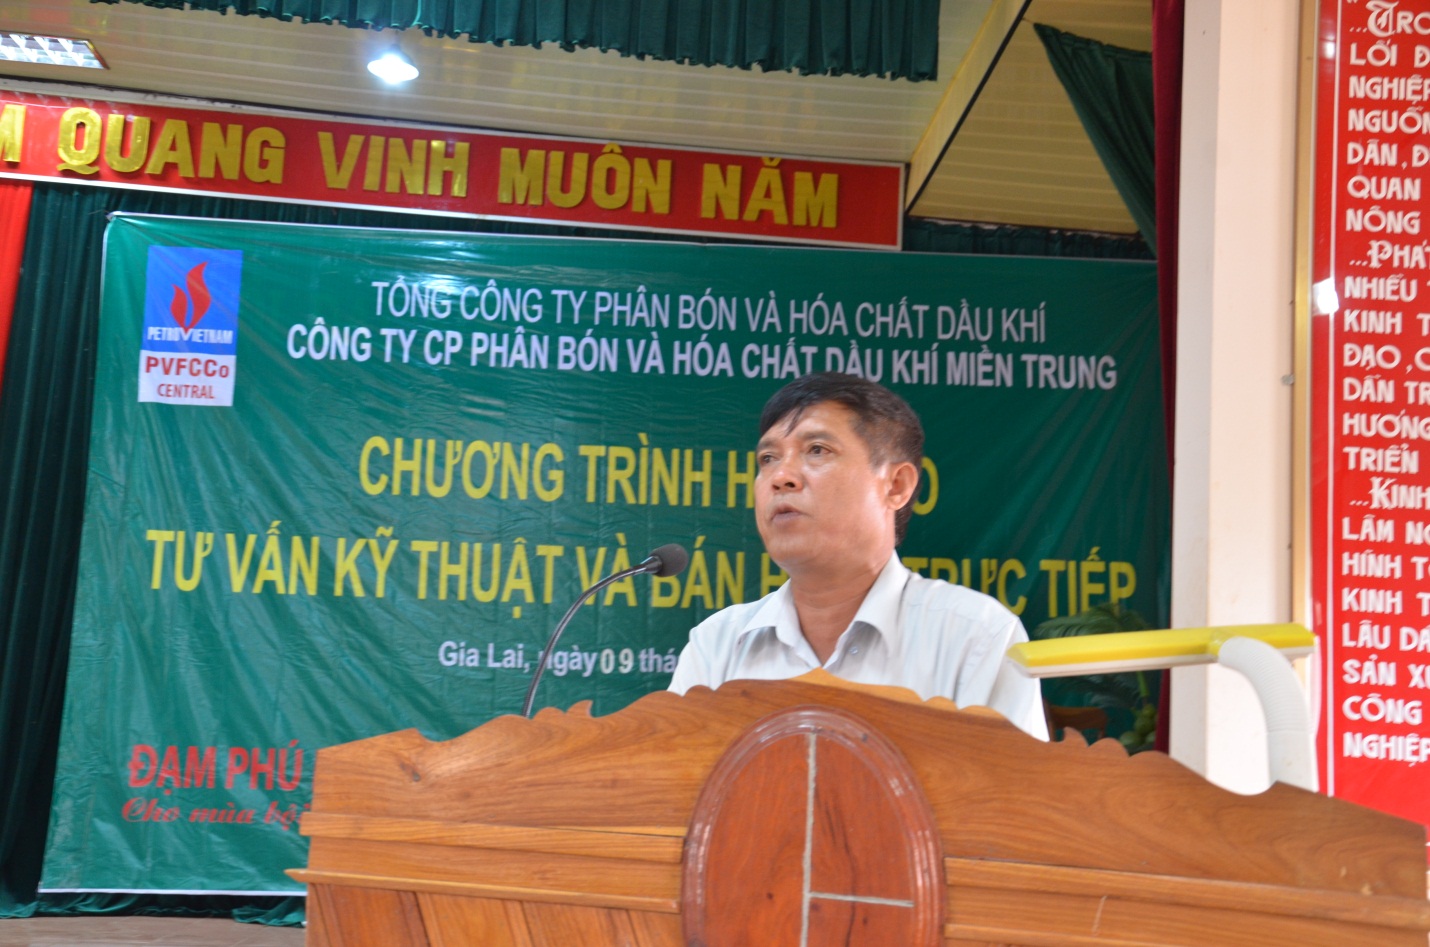 Seminar on technical guidance and selling for agencies at Ia Grai district – Gia Lai province